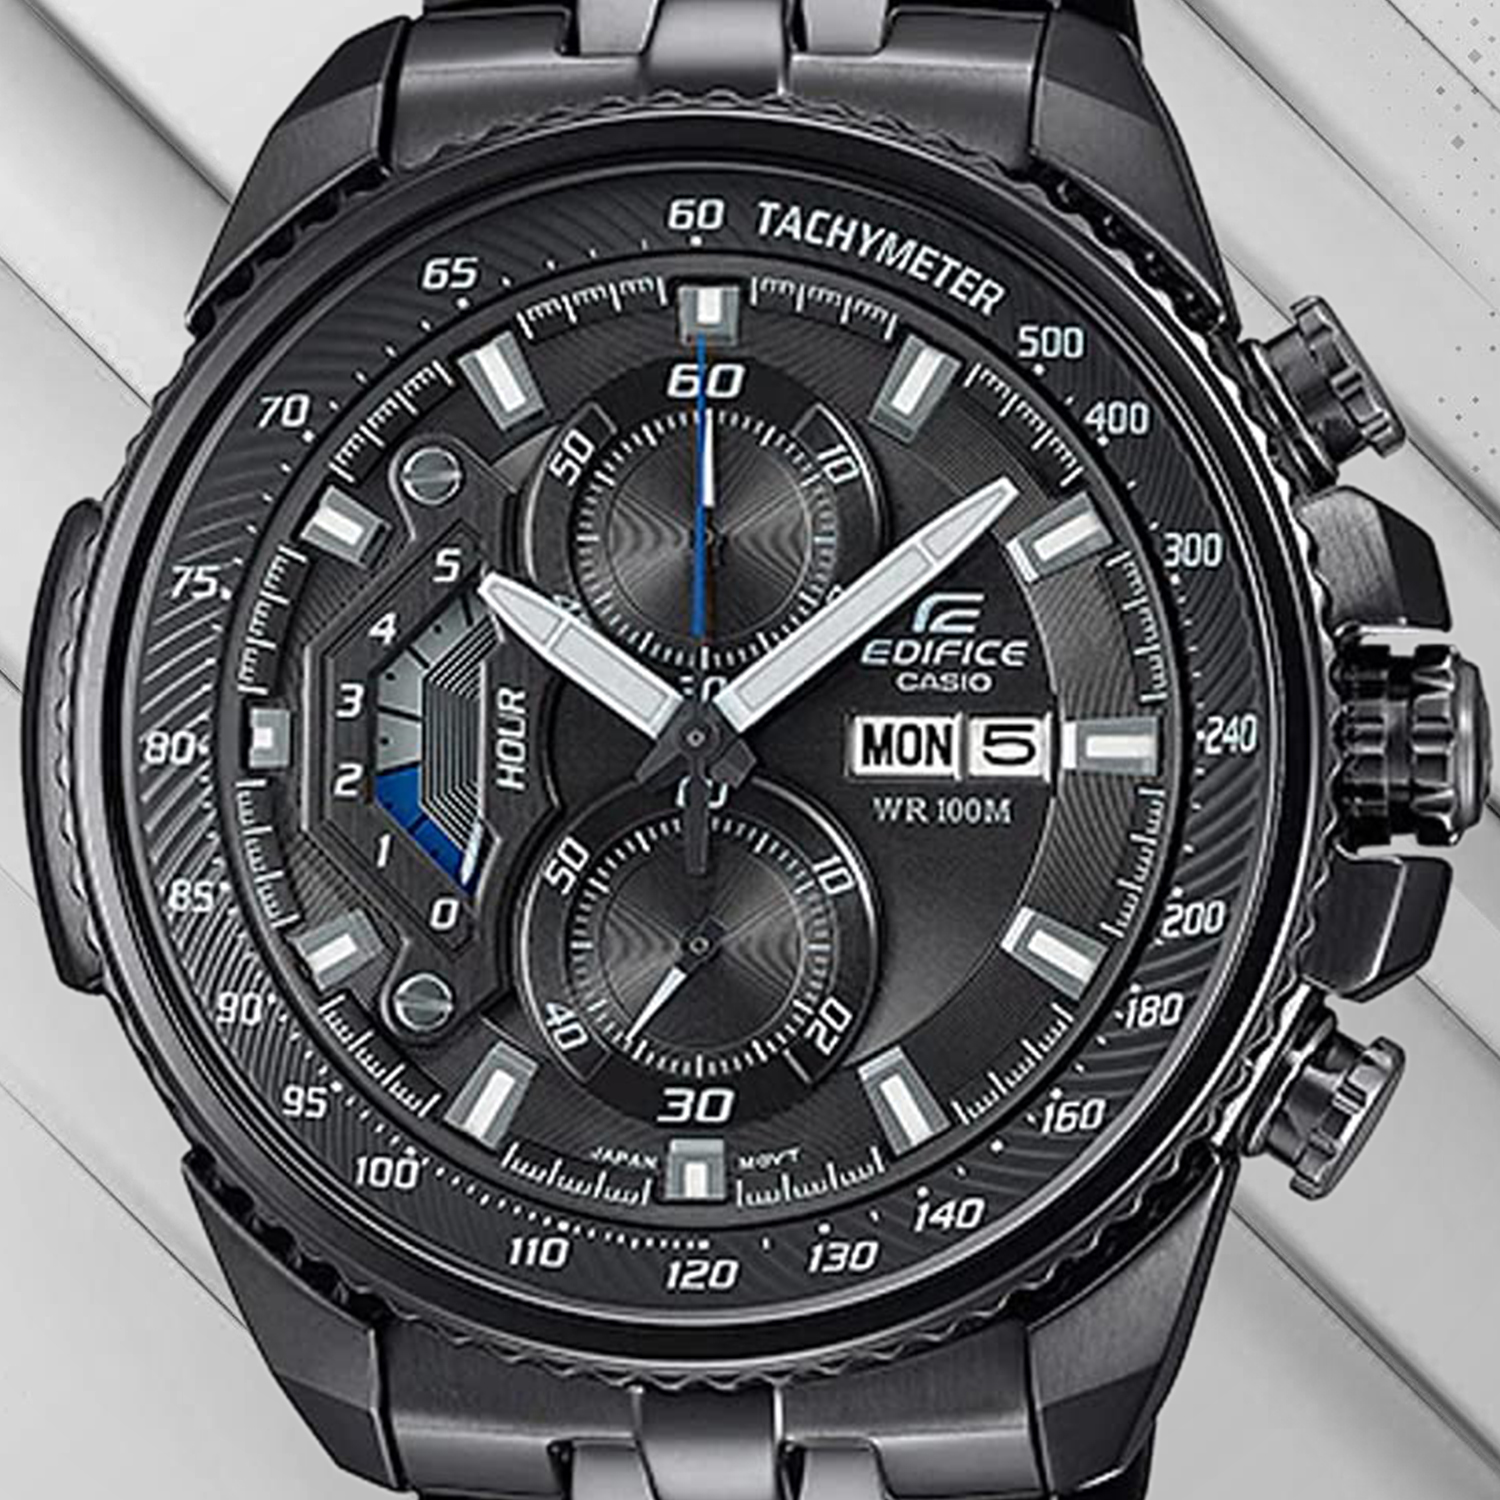 Casio Edifice EX296 Men's Watch in Lucknow at best price by Jain Watch  Company - Justdial